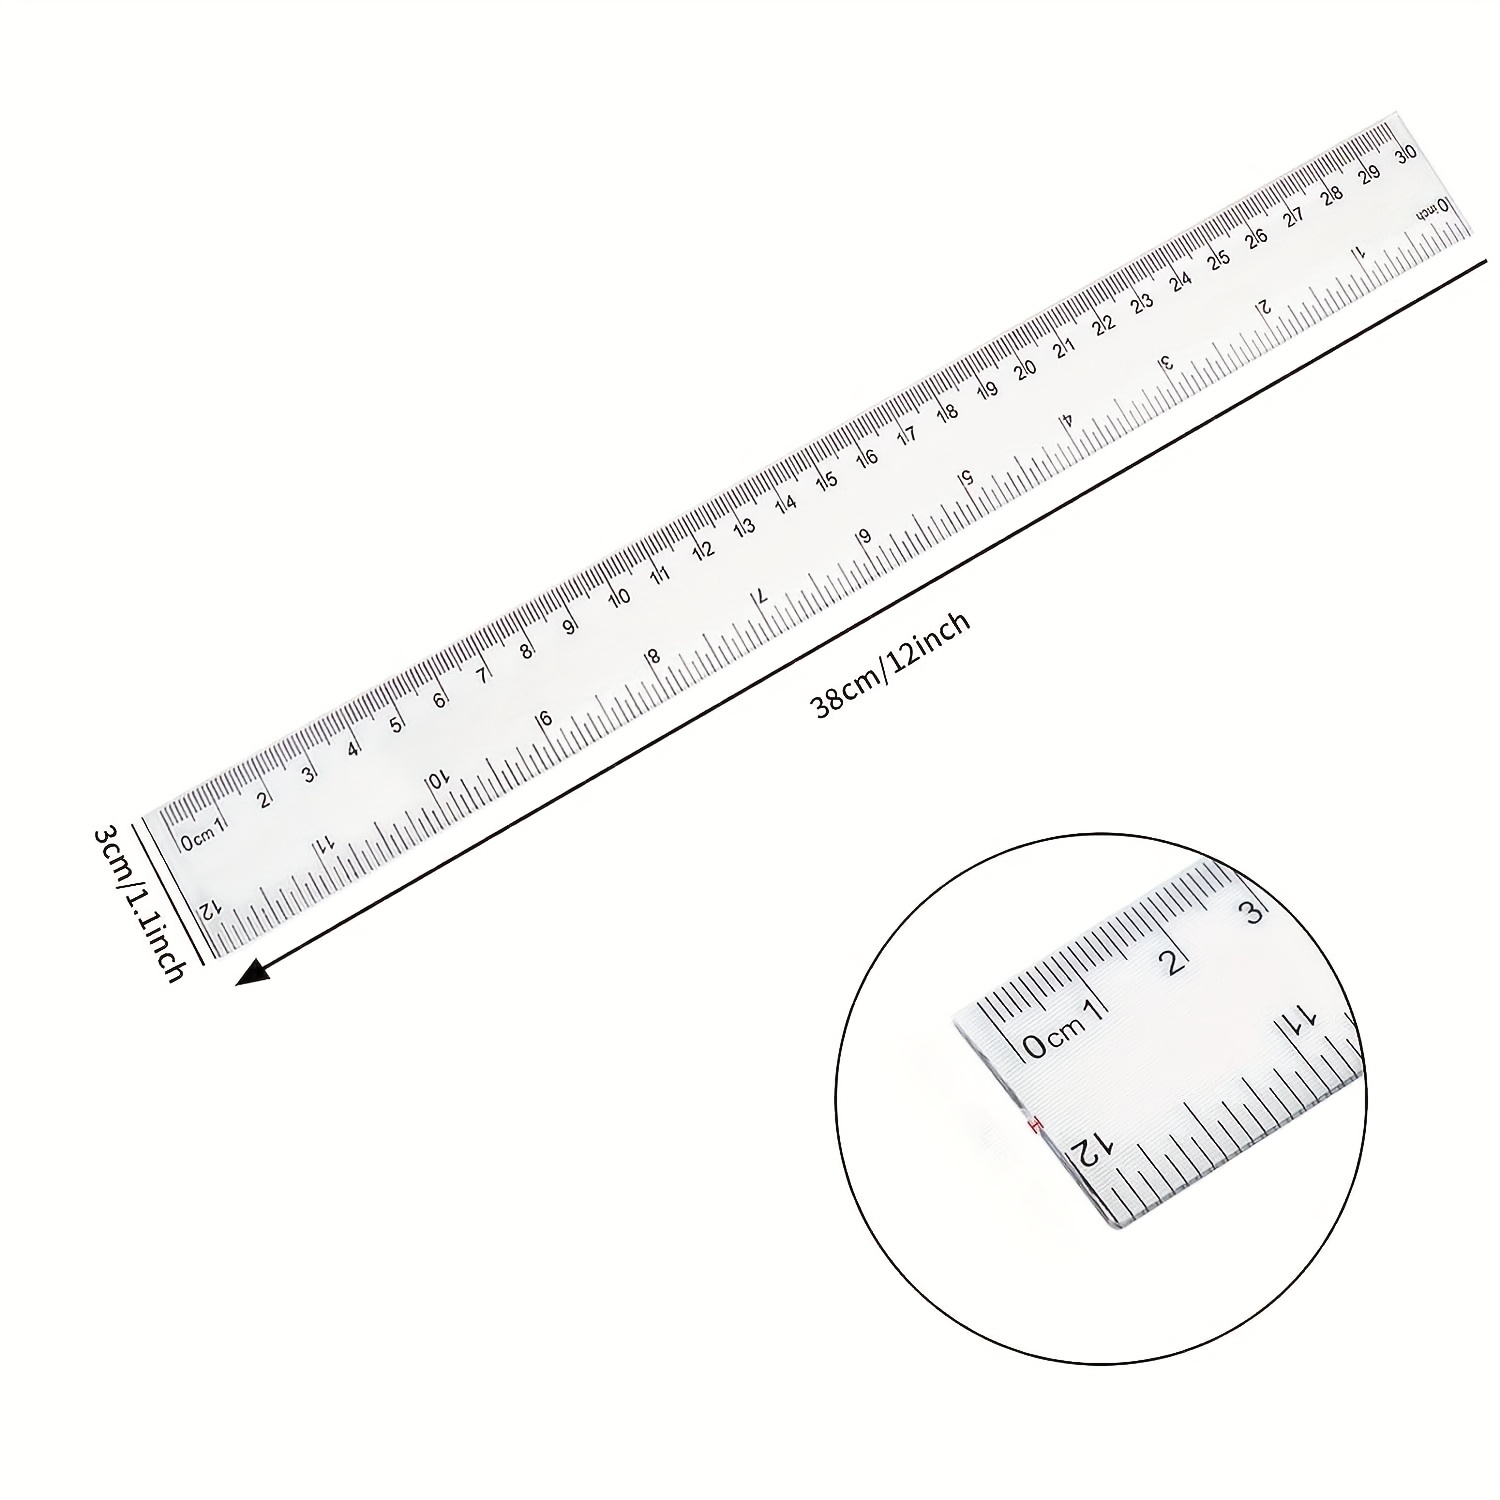 30 Pack Clear Ruler Plastic Rulers 12 inch Transparent Assorted Color Kids Ruler Bulk for School with Centimeters Millimeter and Inches, Measuring